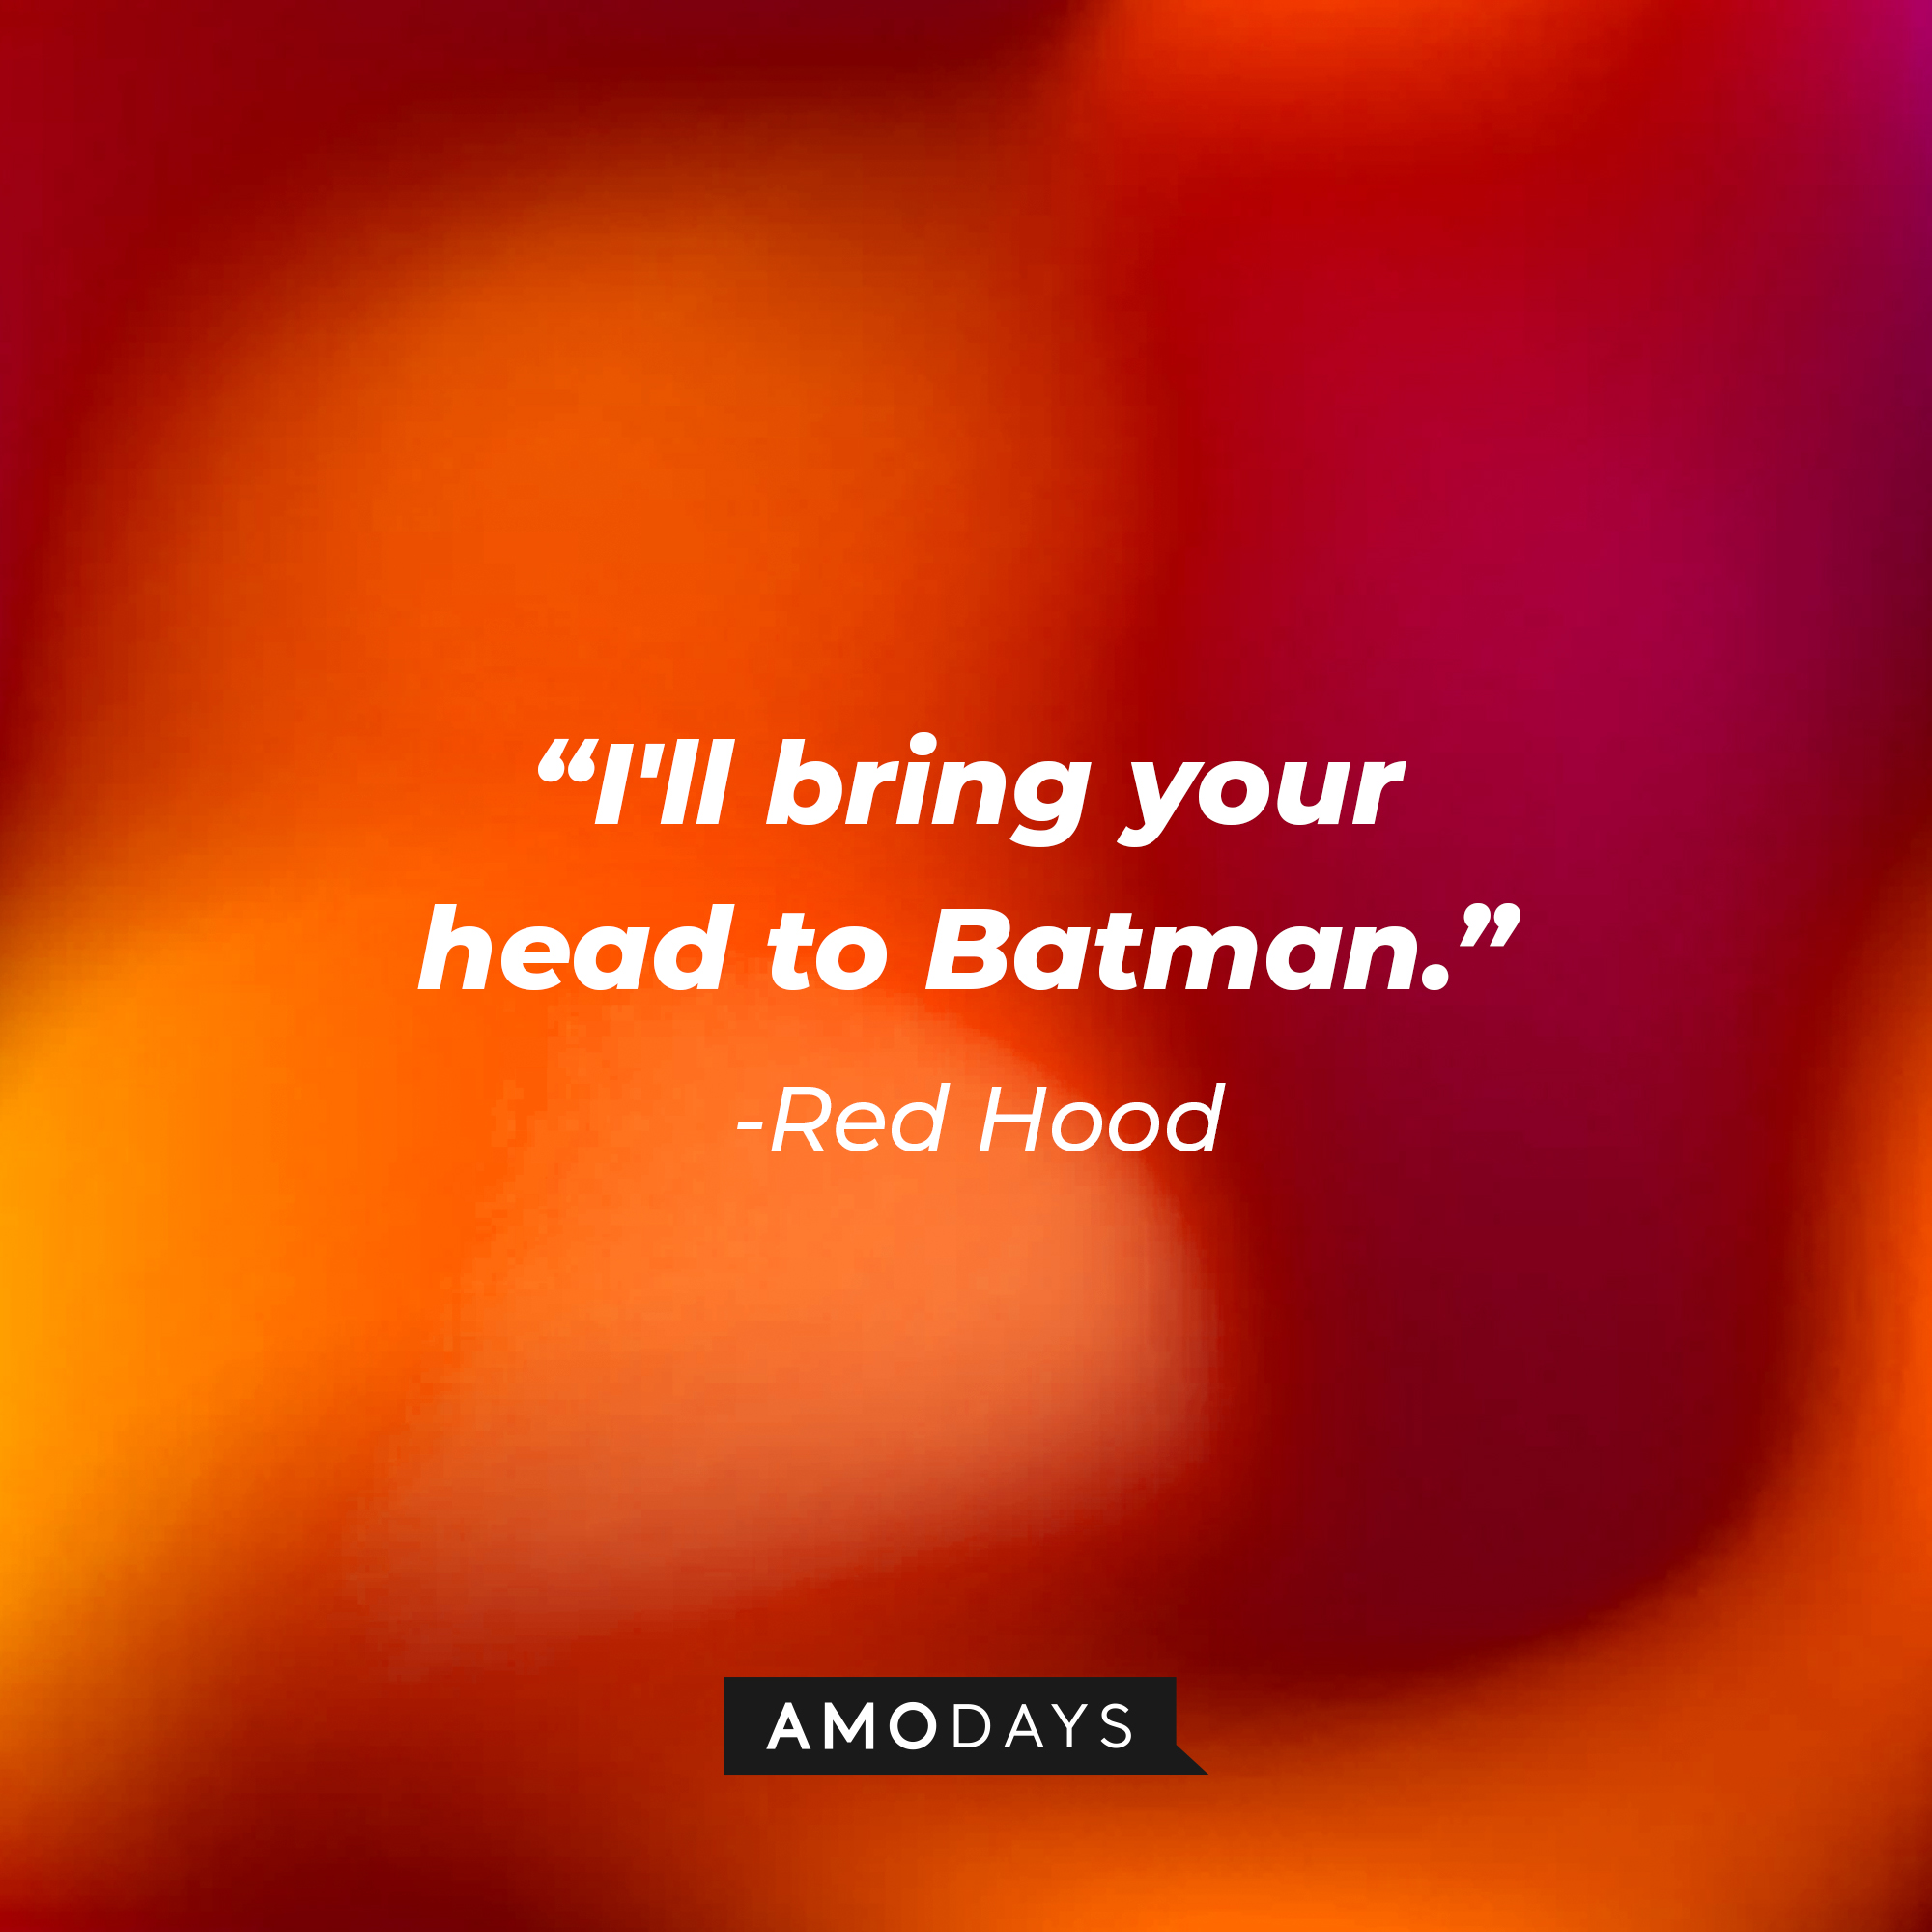 Red Hood’s quote: "I'll bring your head to Batman." | Source: AmoDays